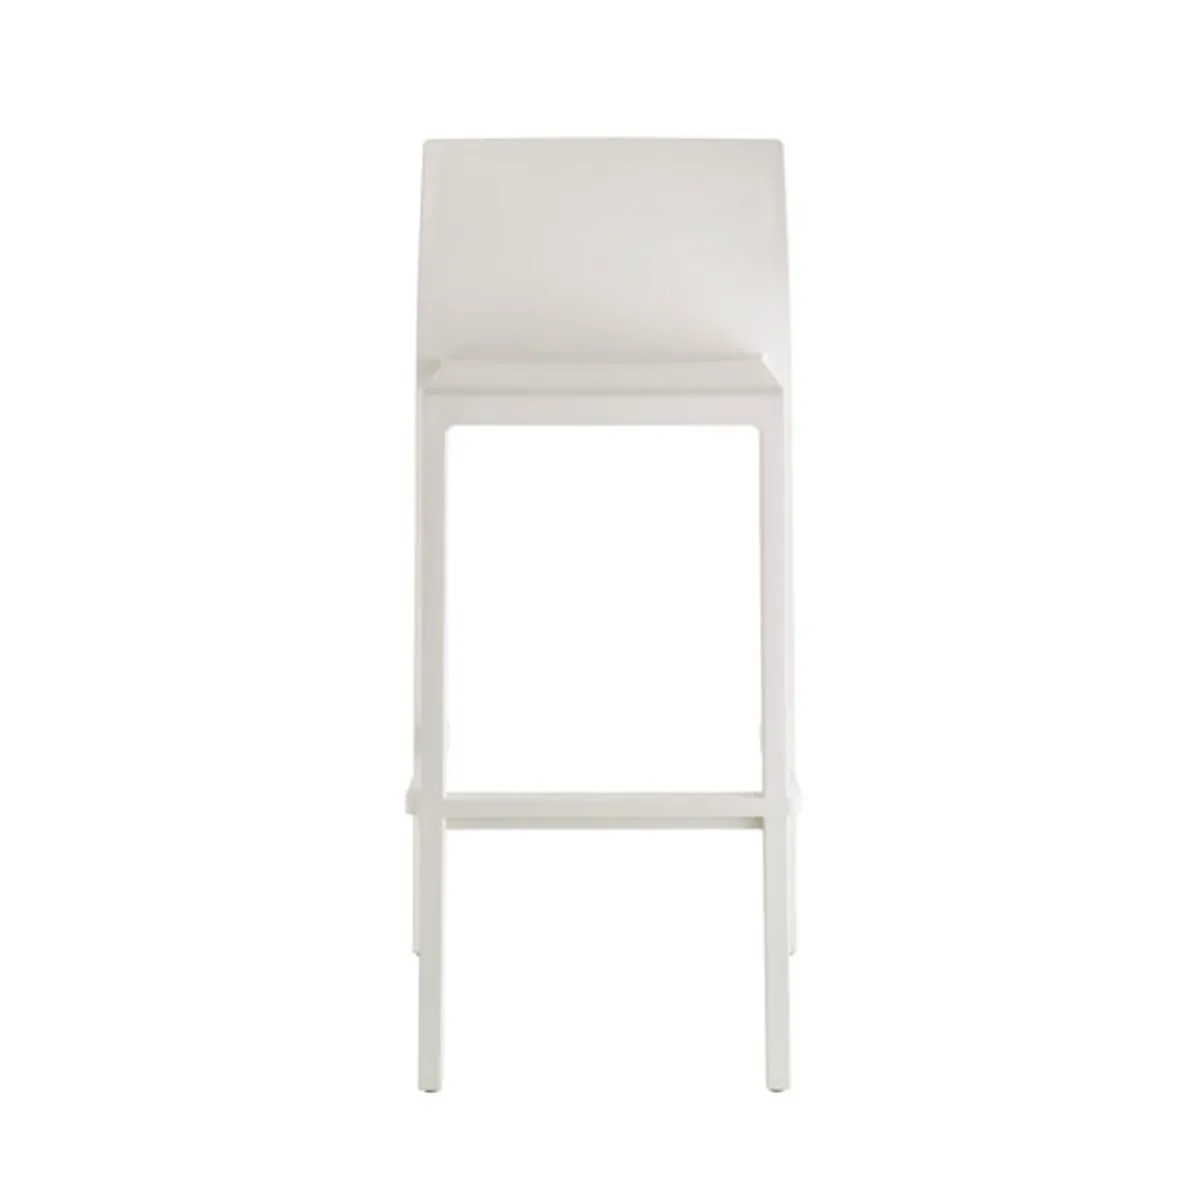 Remi bar stool bar height 5 Inside Out Contracts